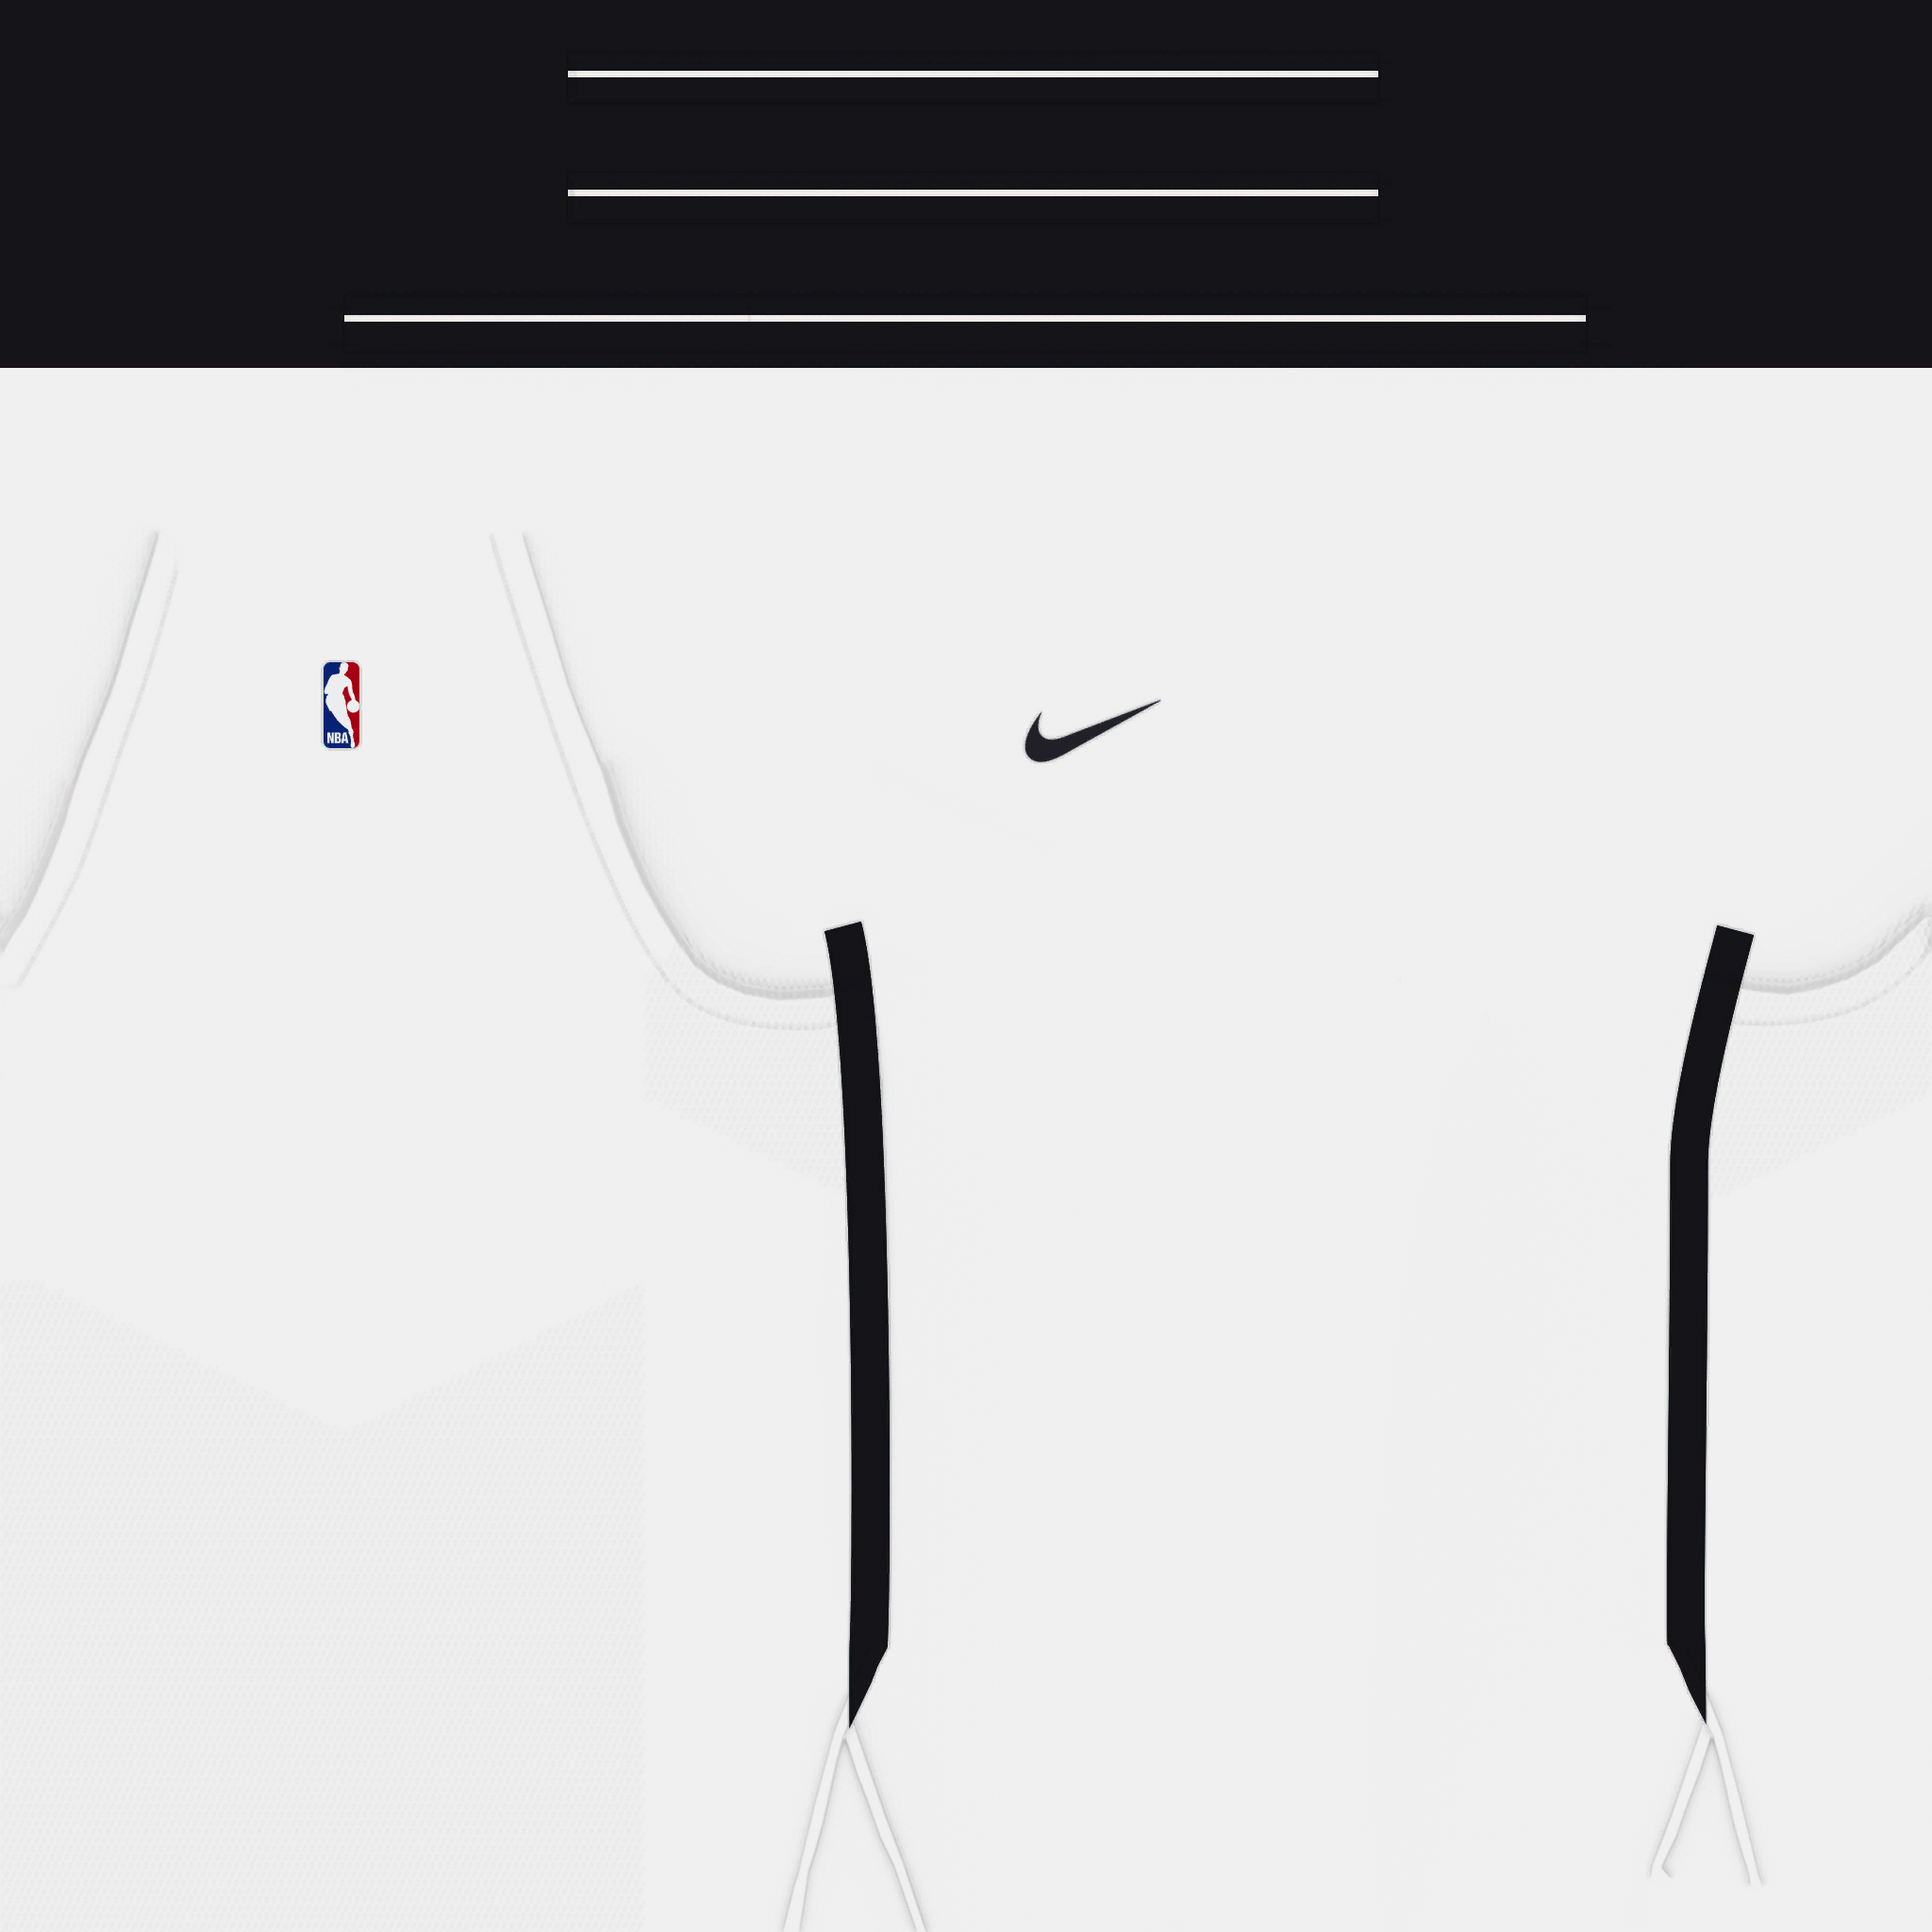 Download Nba 2k21 Jersey Template Psd Normal Map Tutorial By Pinoy21 Shuajota Your Source For Nba 2k21 Mods